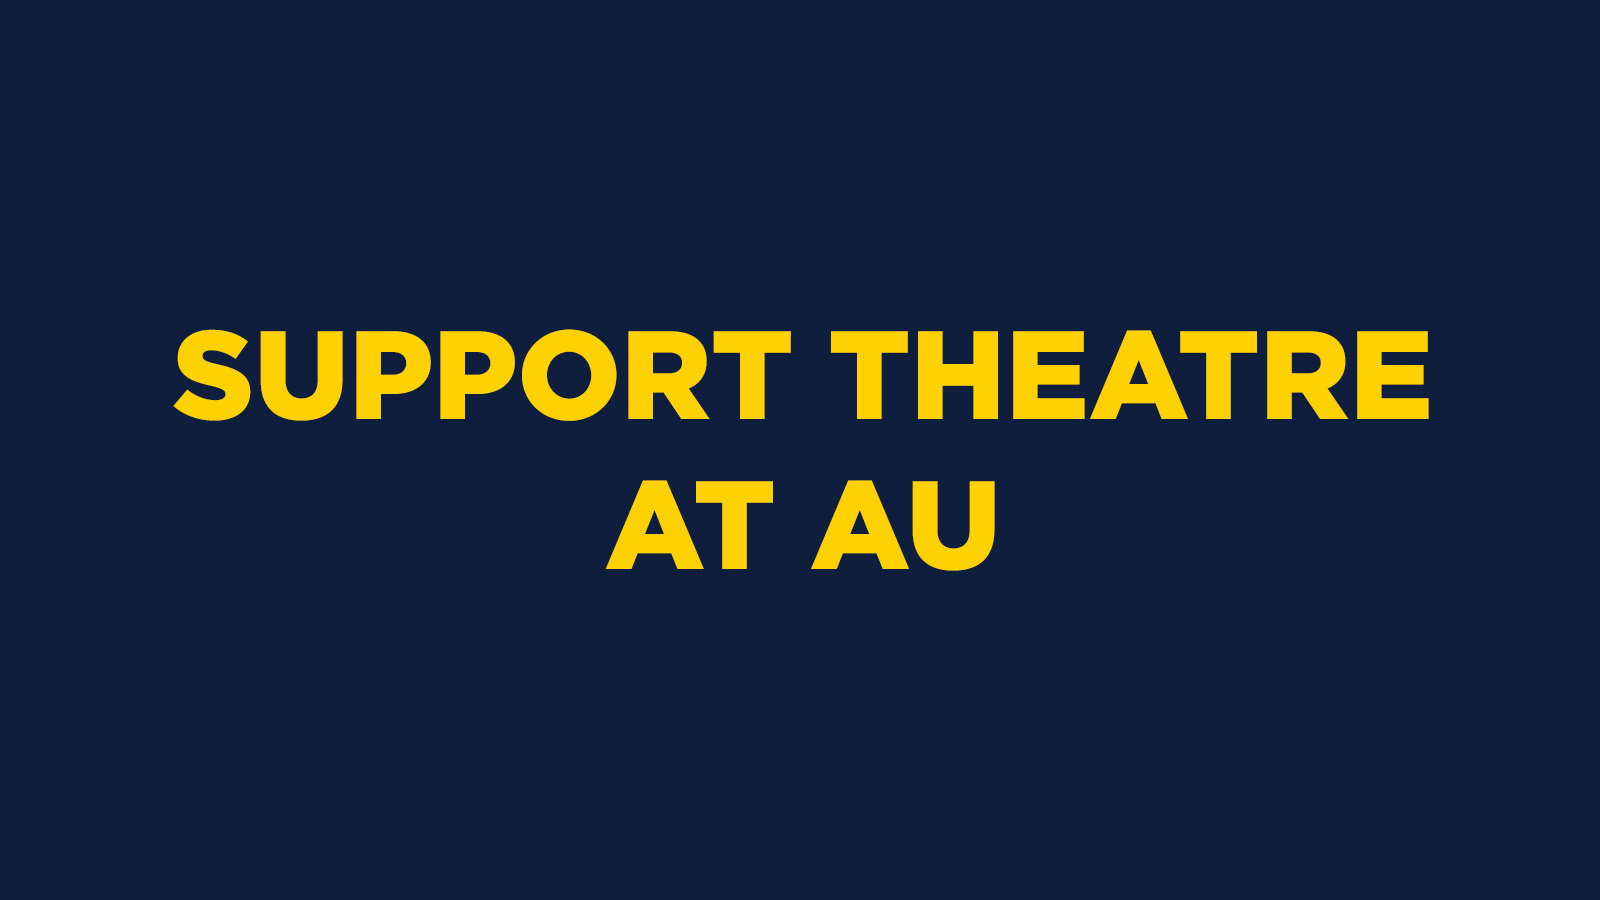 SUPPORT THEATRE AT AU